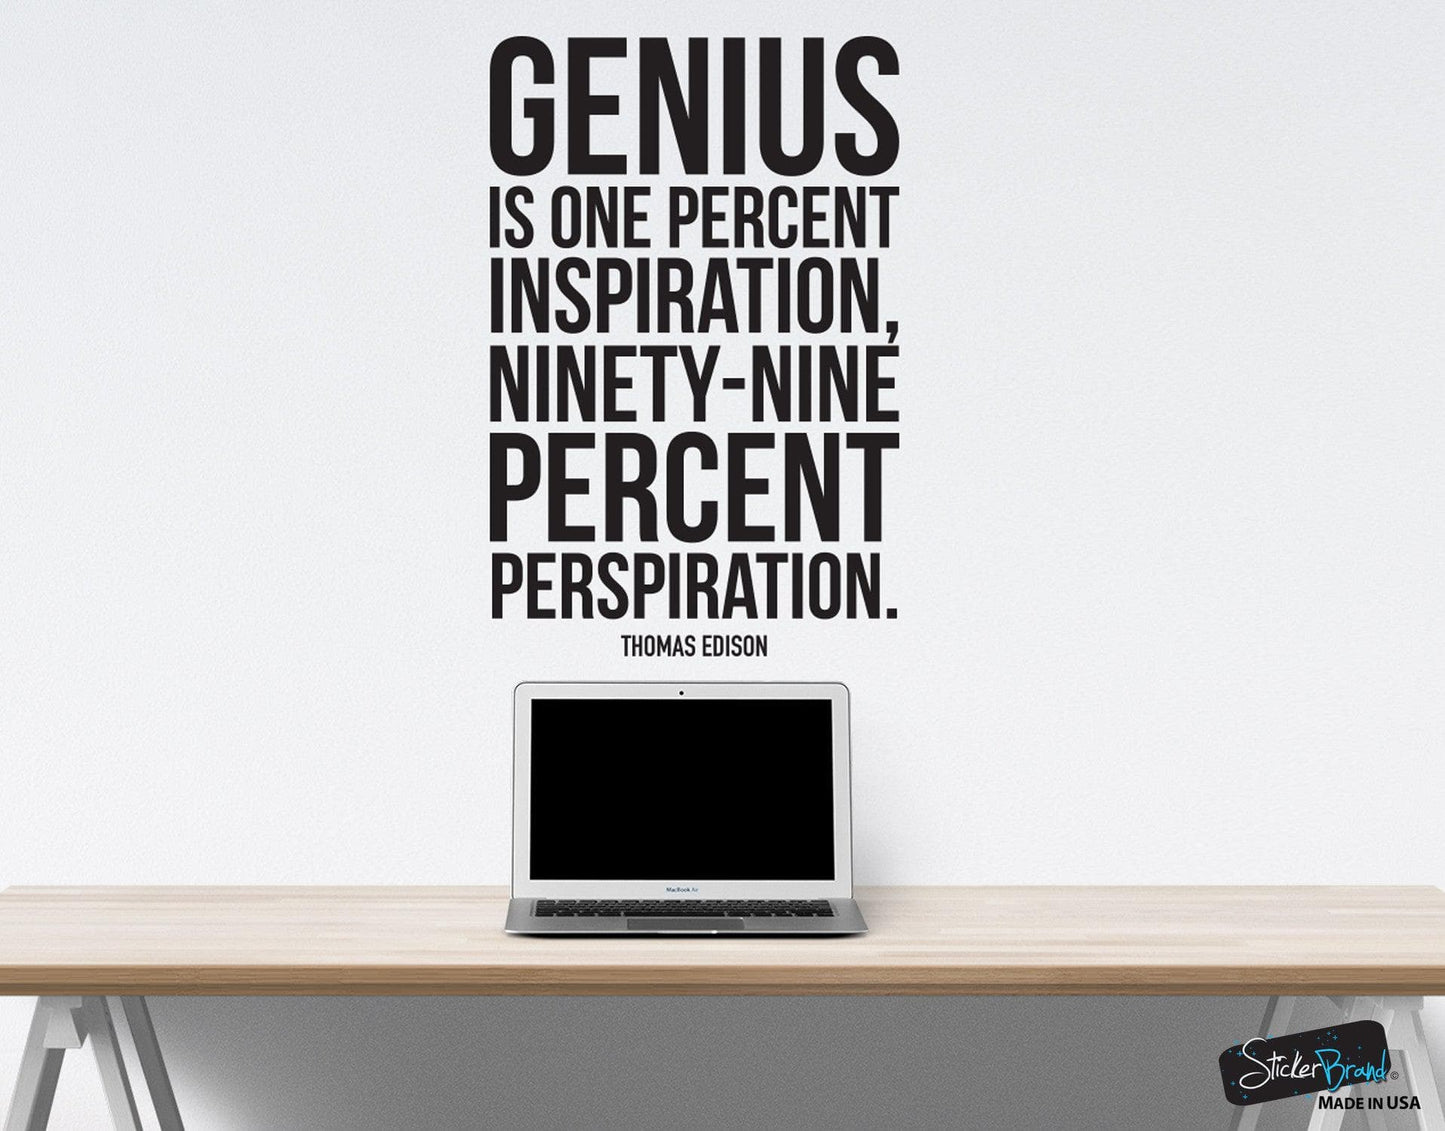 Thomas Edison Quote: Genius is One Percent Inspiration, Ninety-Nine Percent Perspiration Motivational Quote Wall Decal Sticker #6090